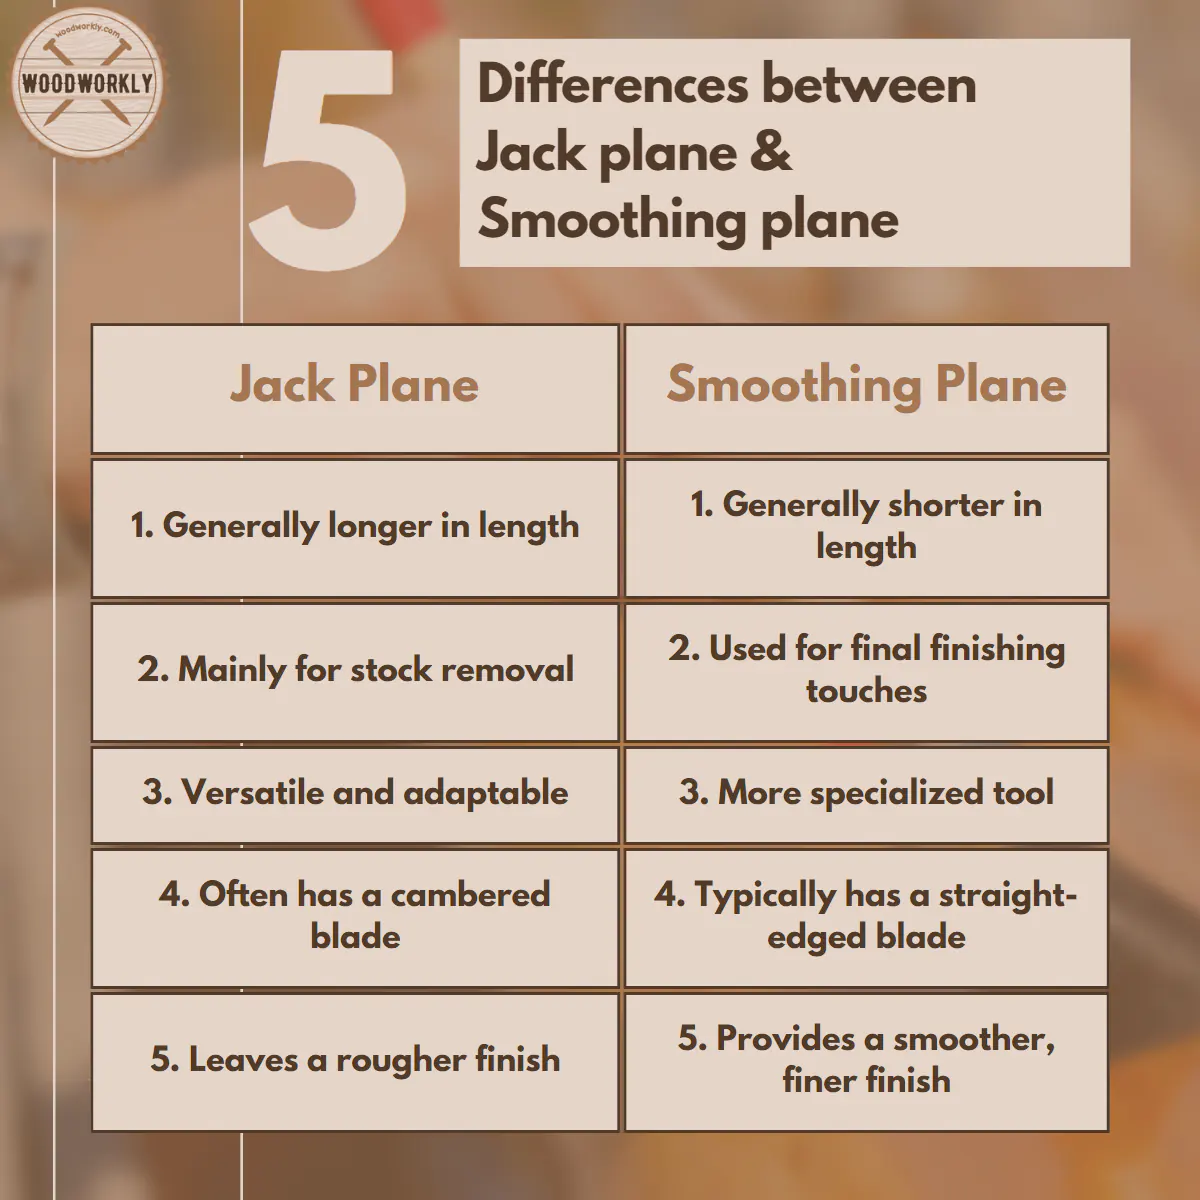 Differences between Jack plane & Smoothing plane